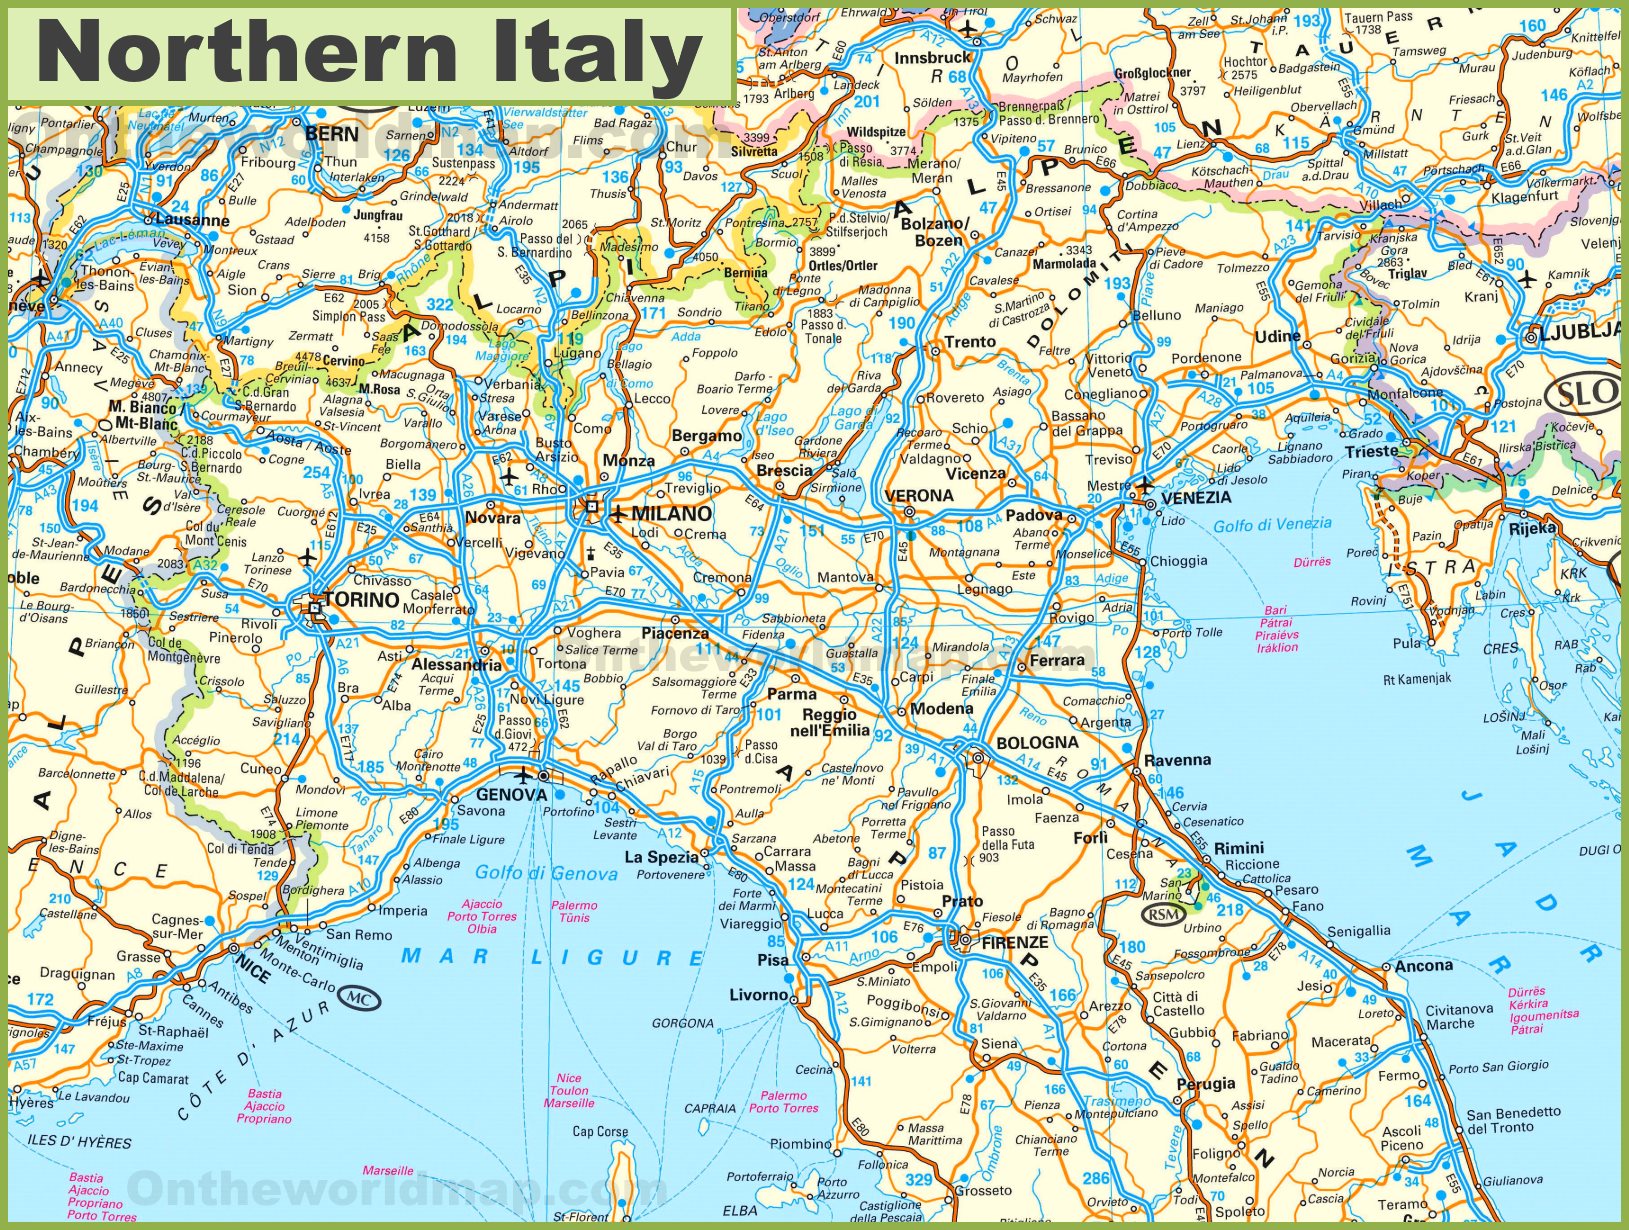 Map Of Northern Italy